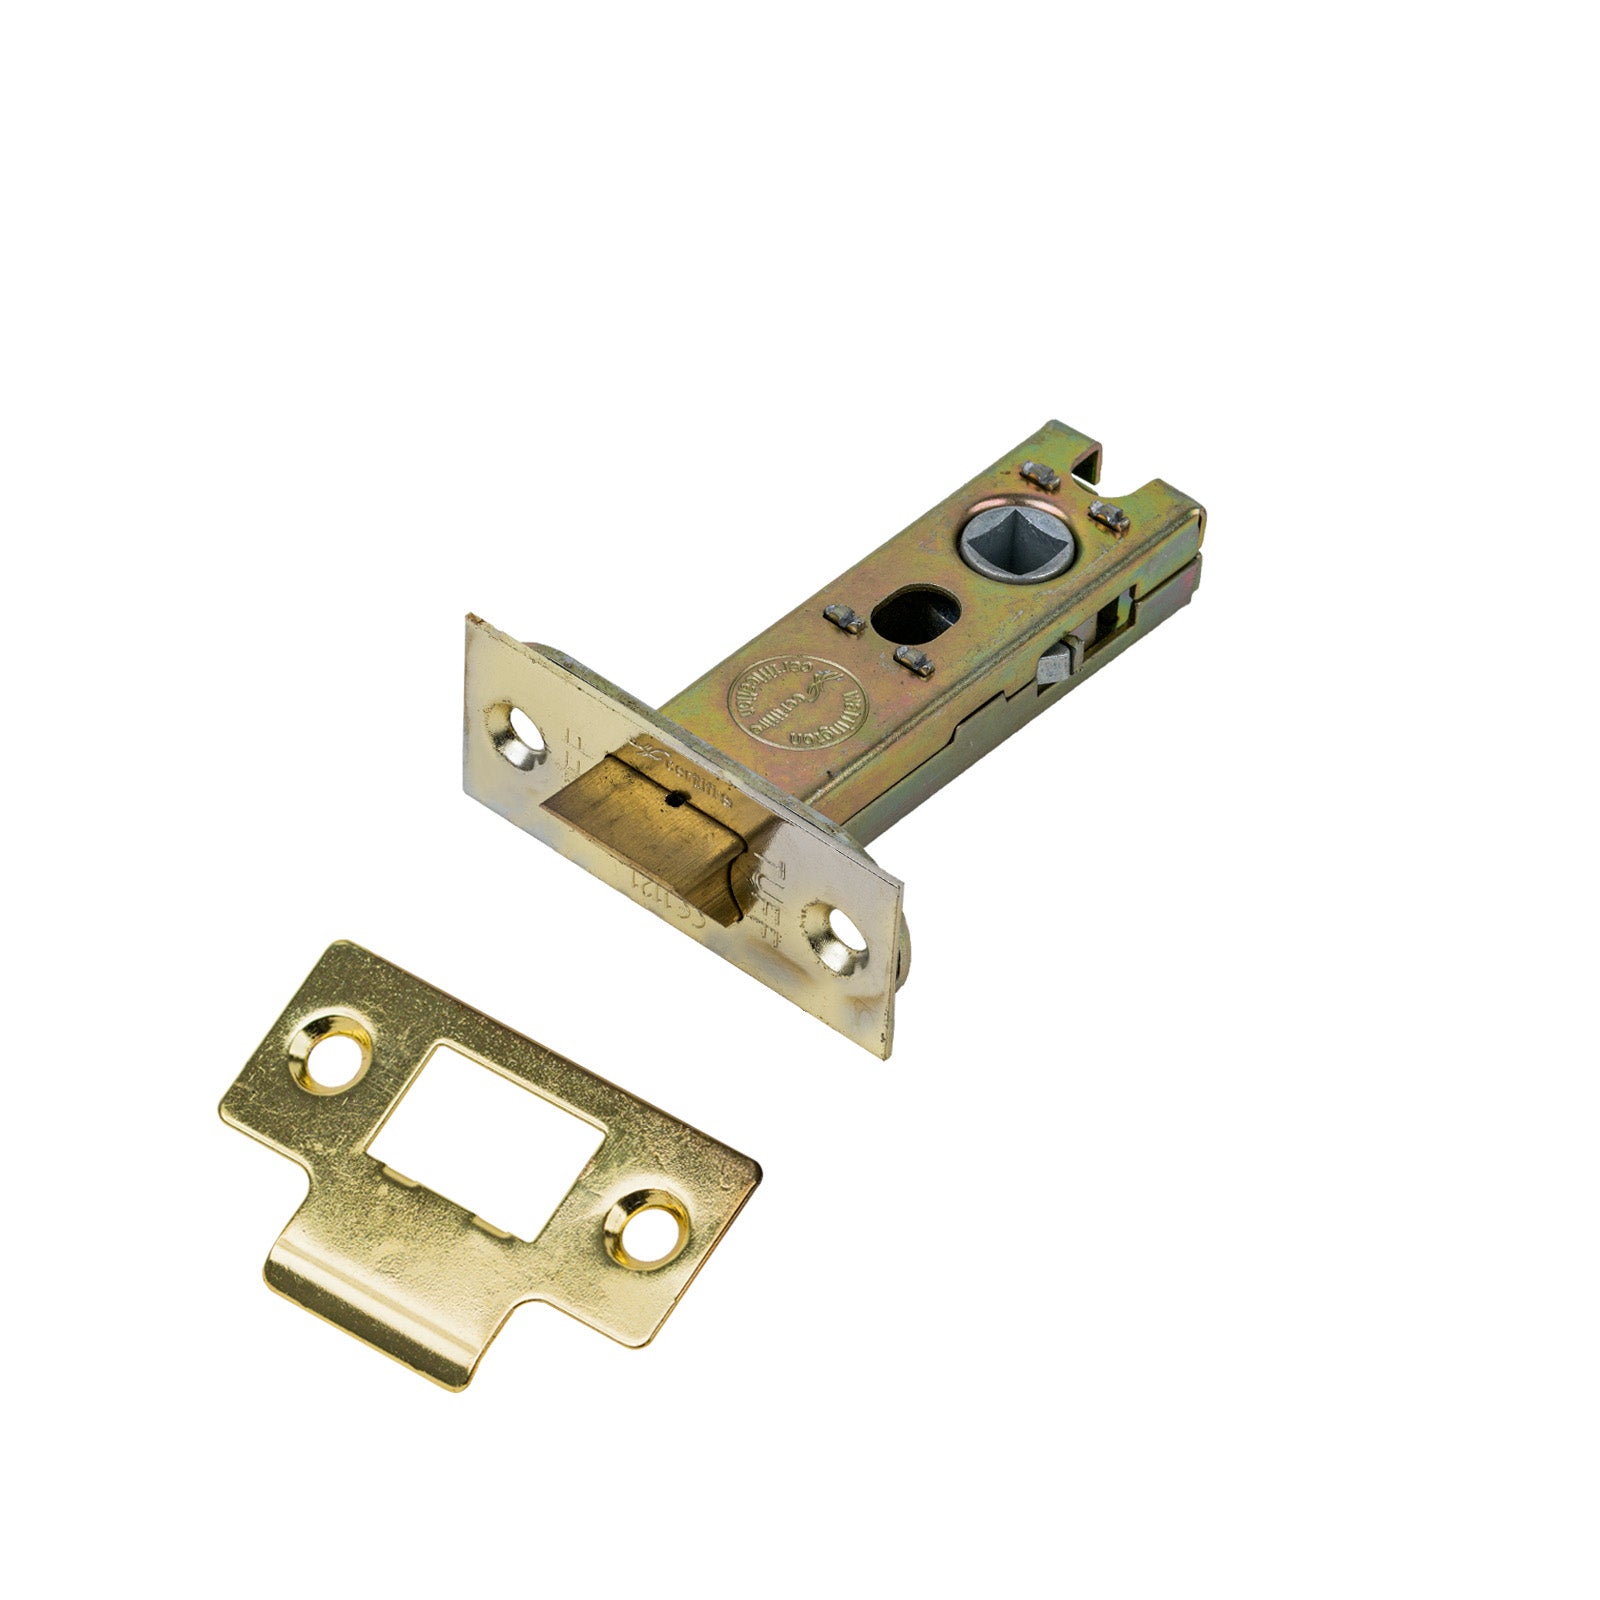 SHOW Heavy Duty Tubular Latch - 3 Inch with Polished brass finished forend and striker plate